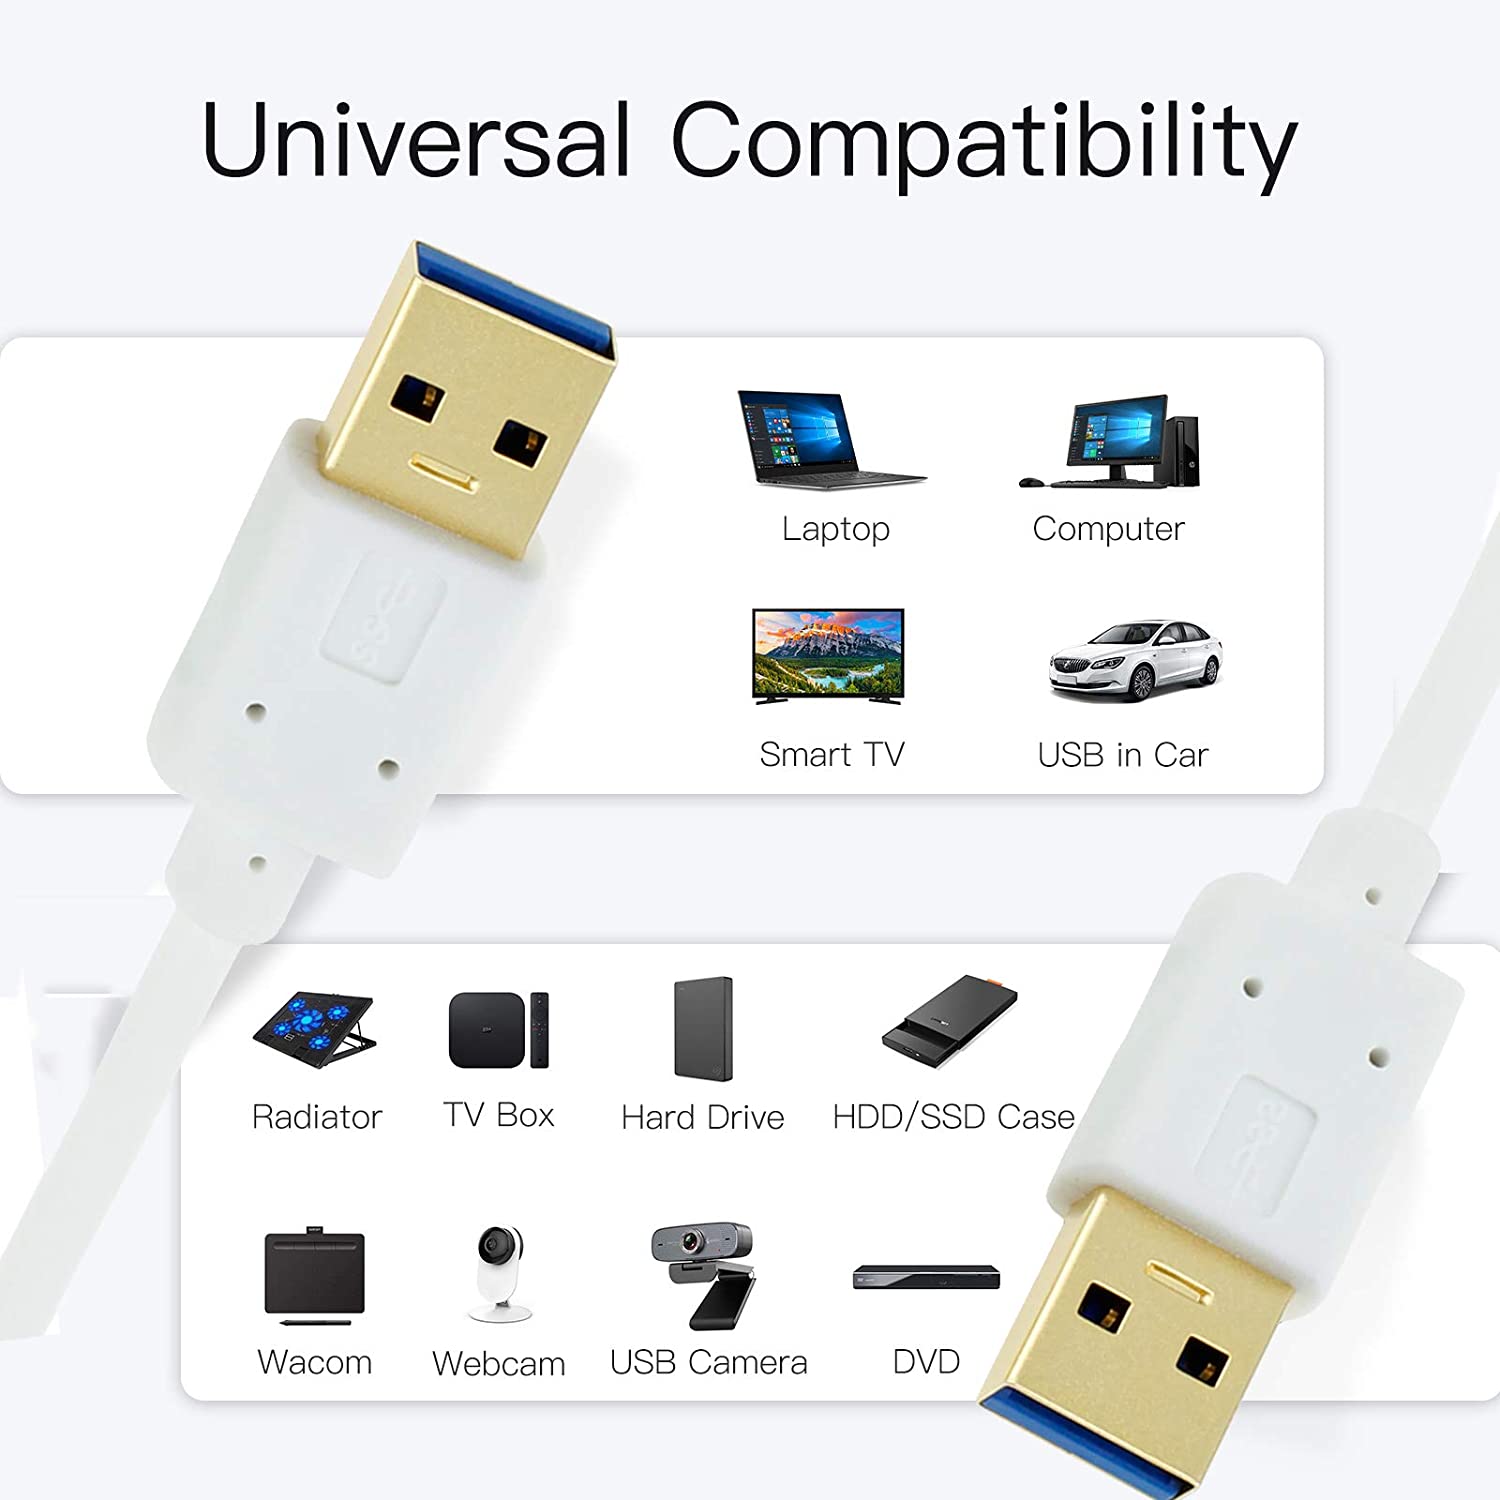 Ultra Slim USB 3.0 Type-A Male to Male Data Cable 1m